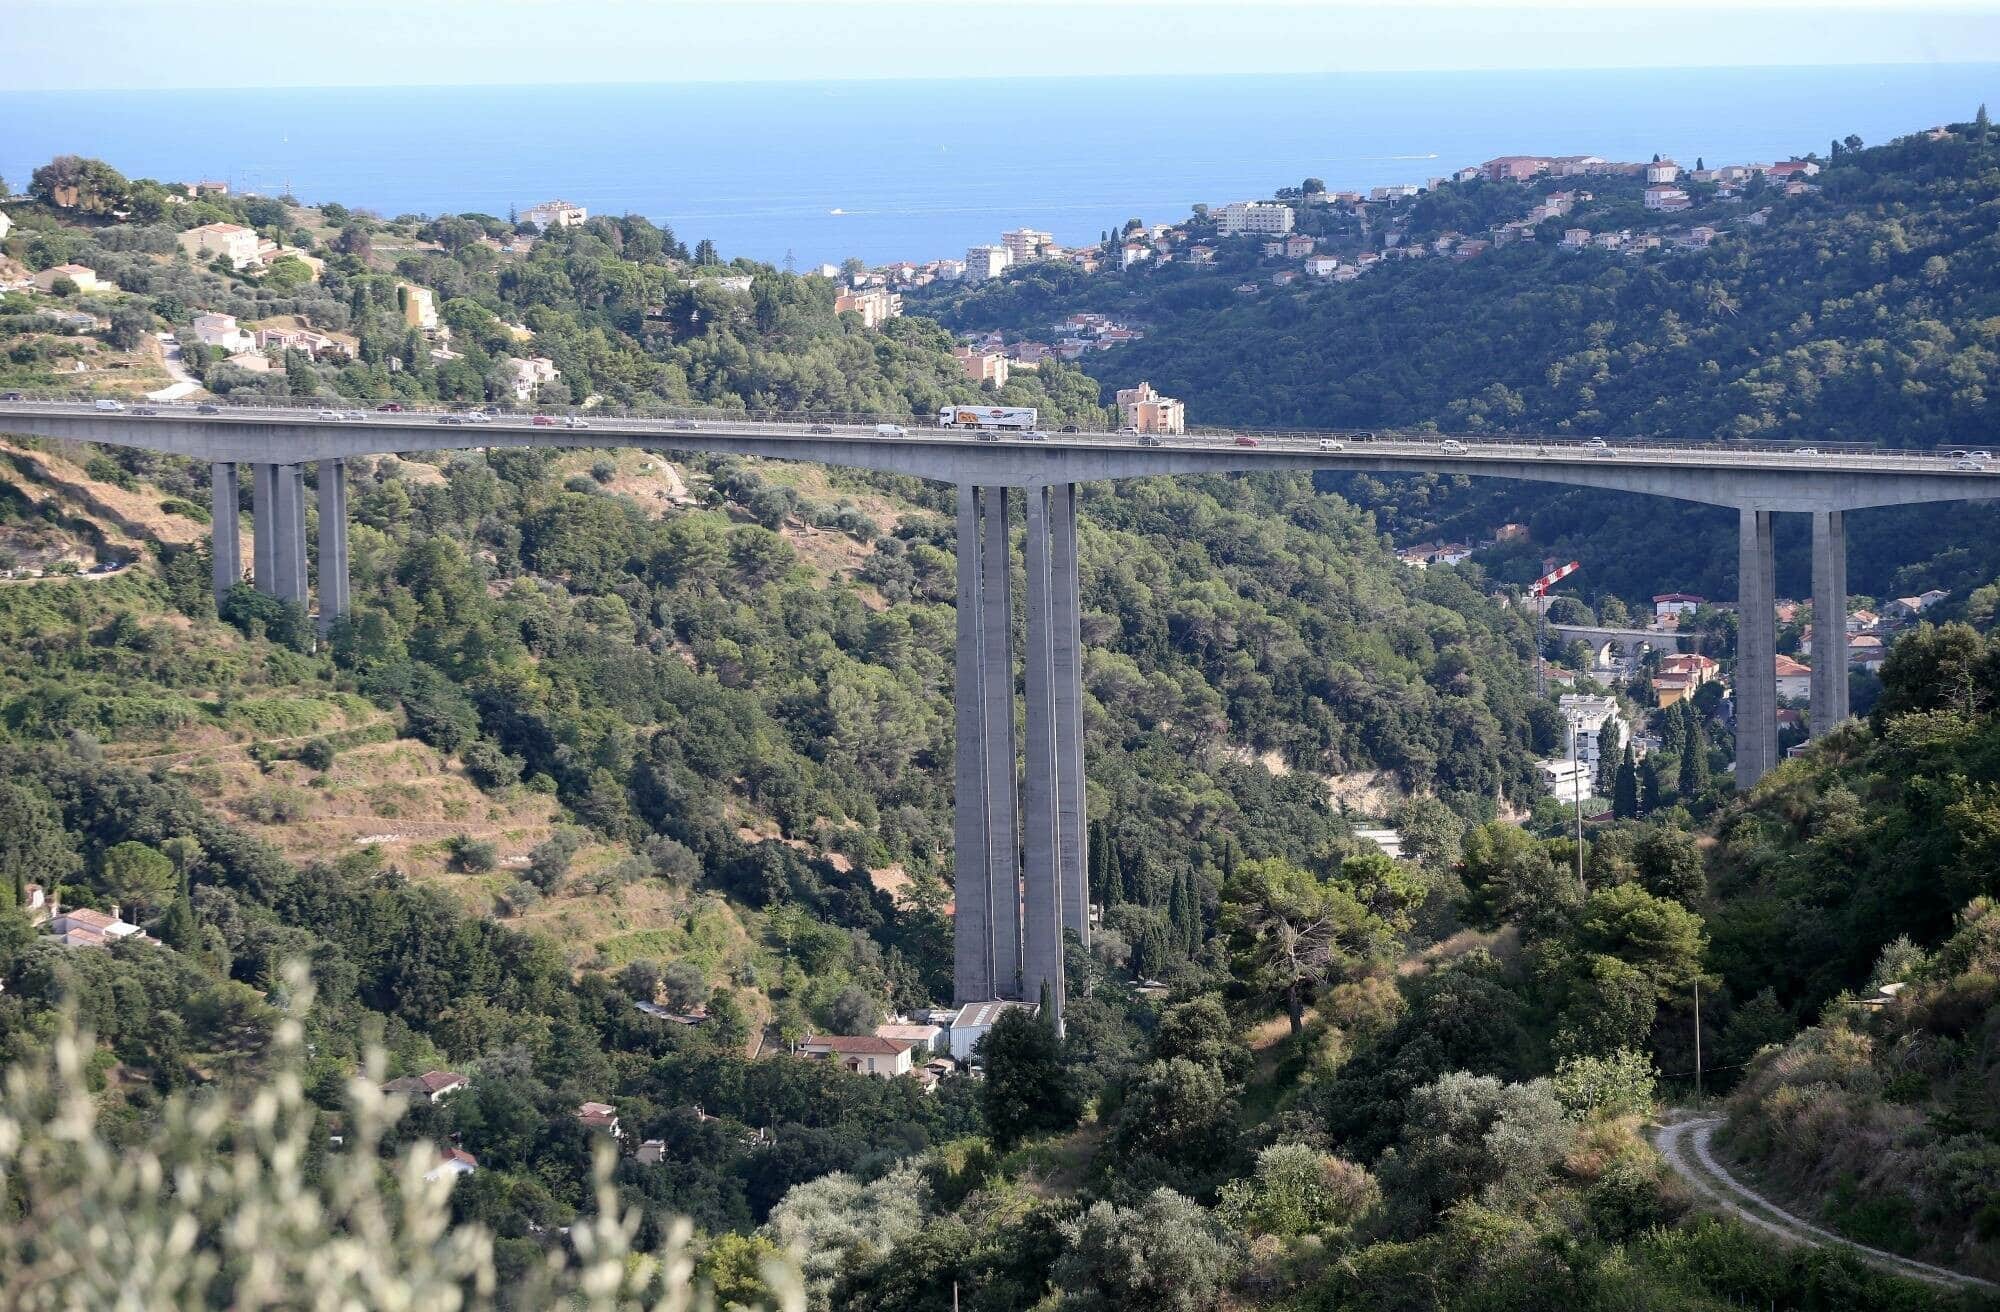 OGC Nice player Beka Beka threatening to commit suicide whilst sat on edge of viaduct | Marca